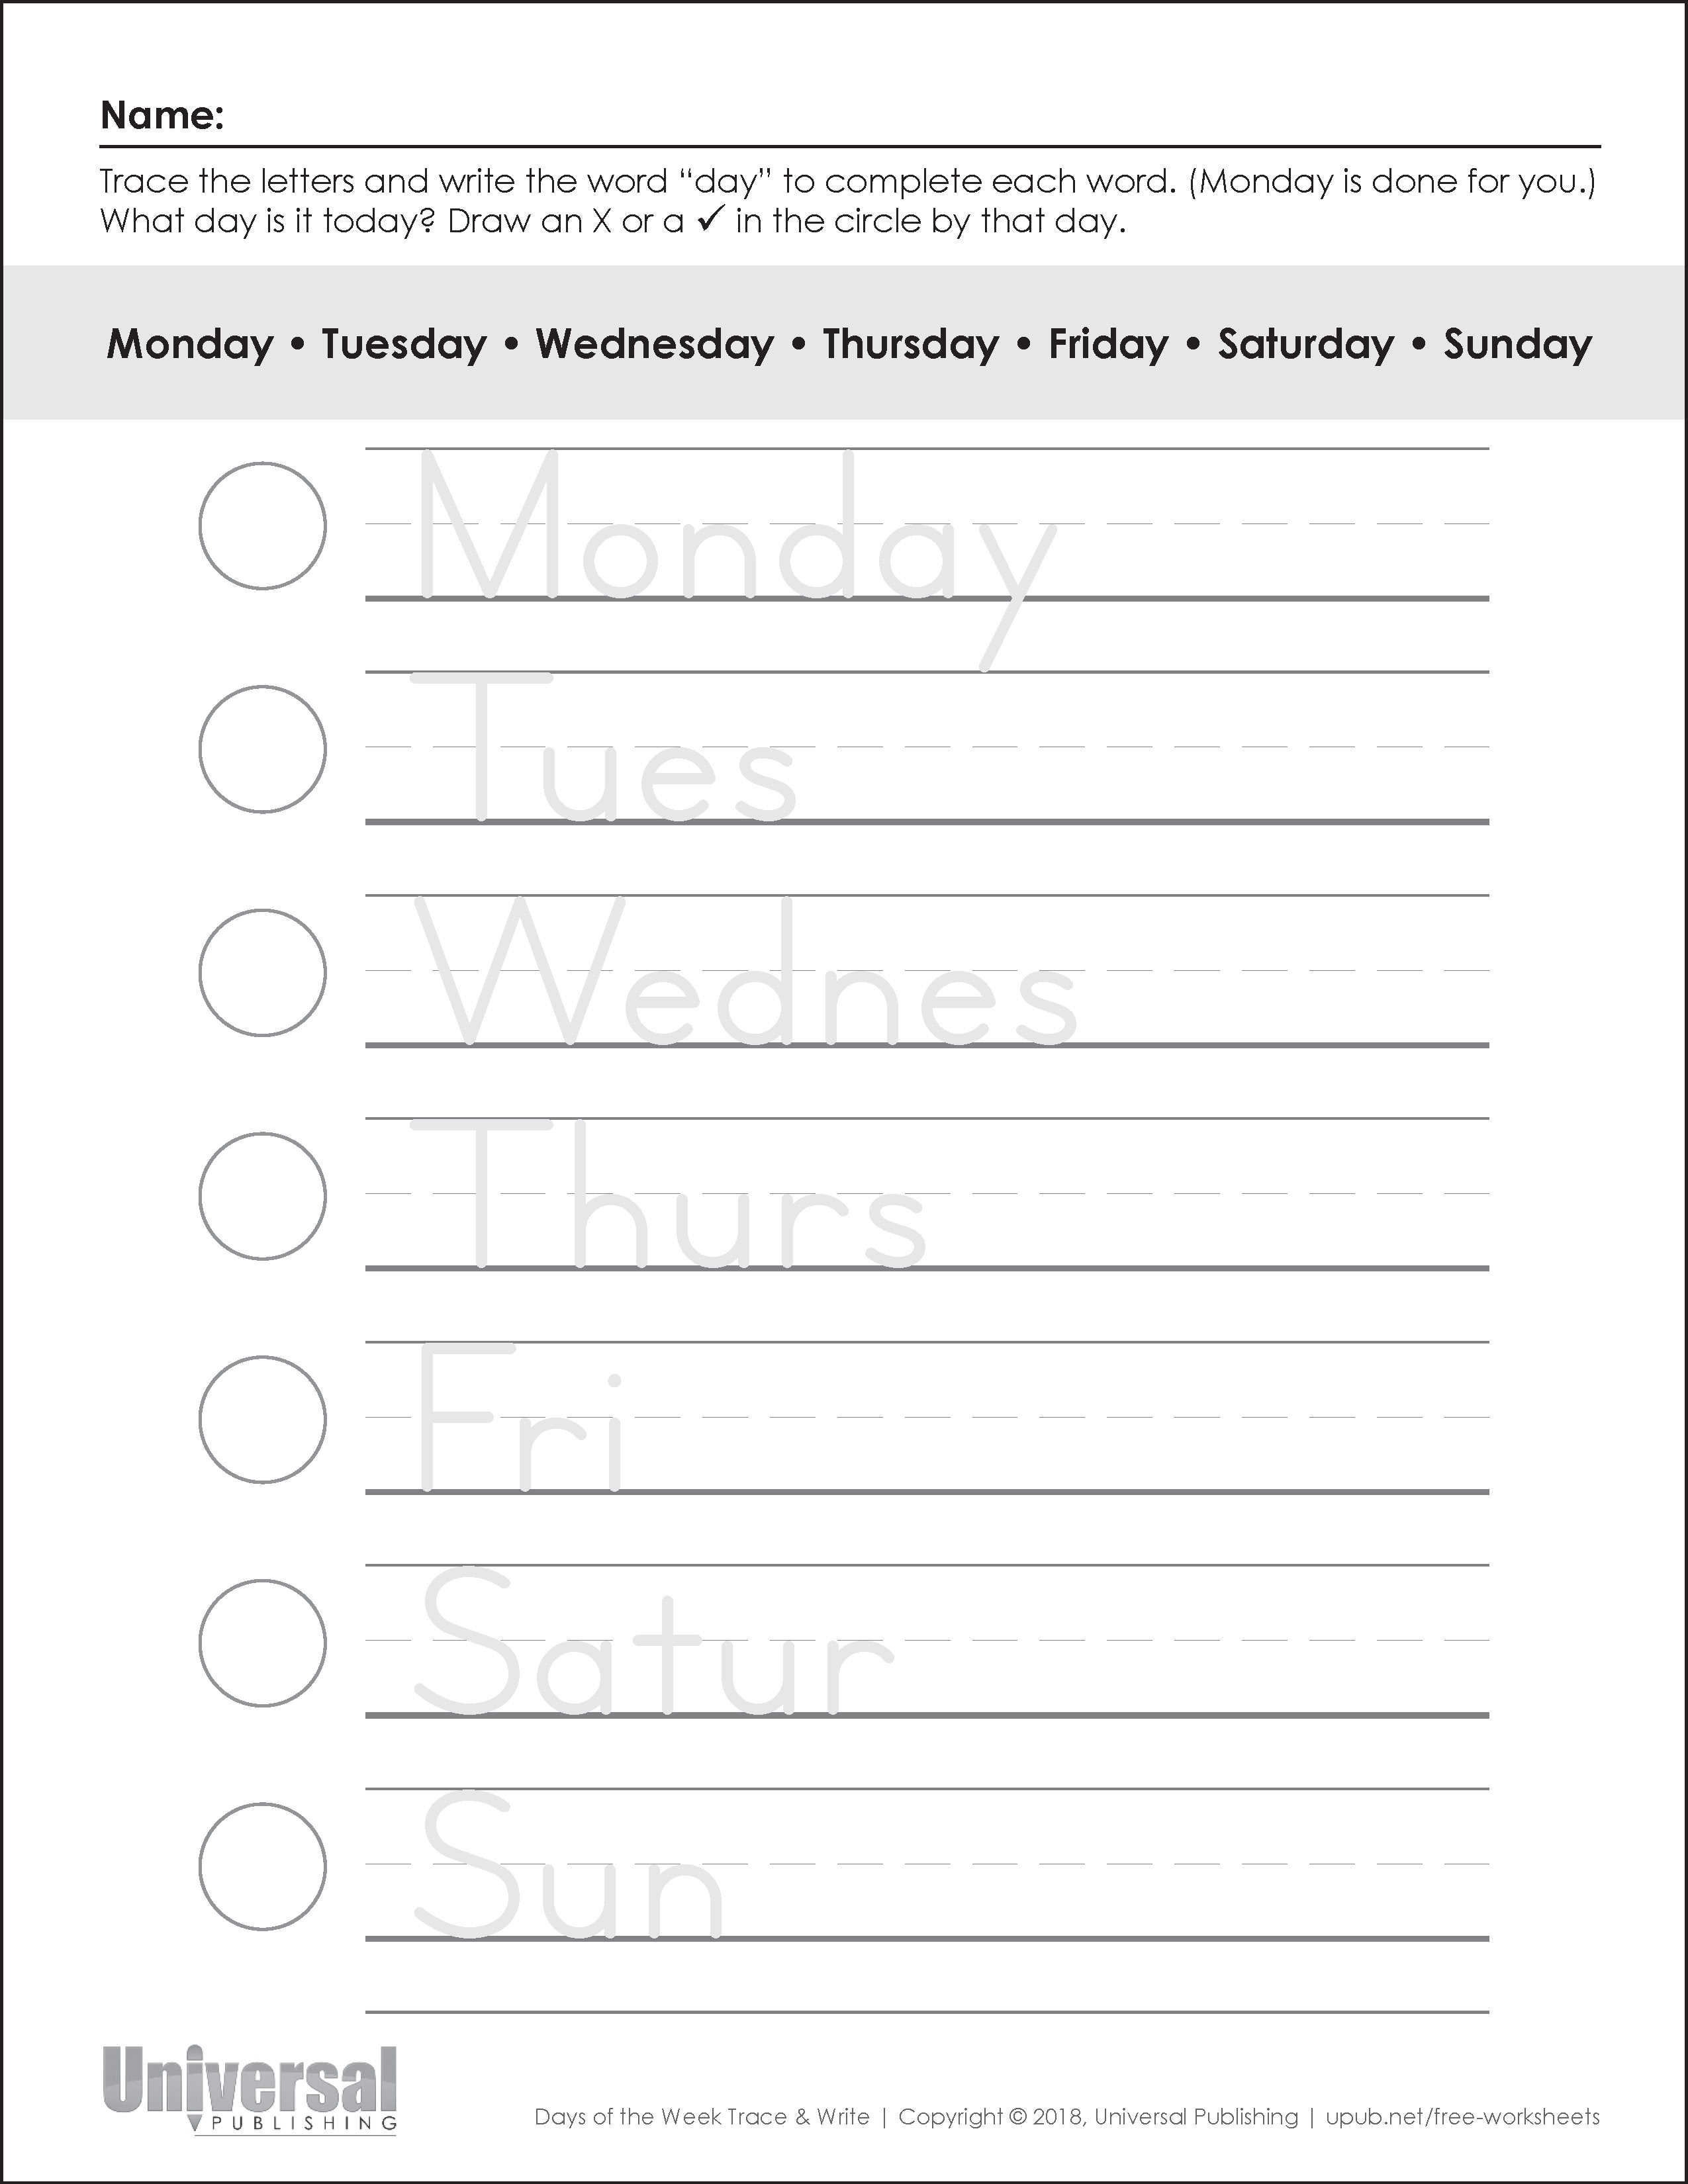 Days of the Week Tracing